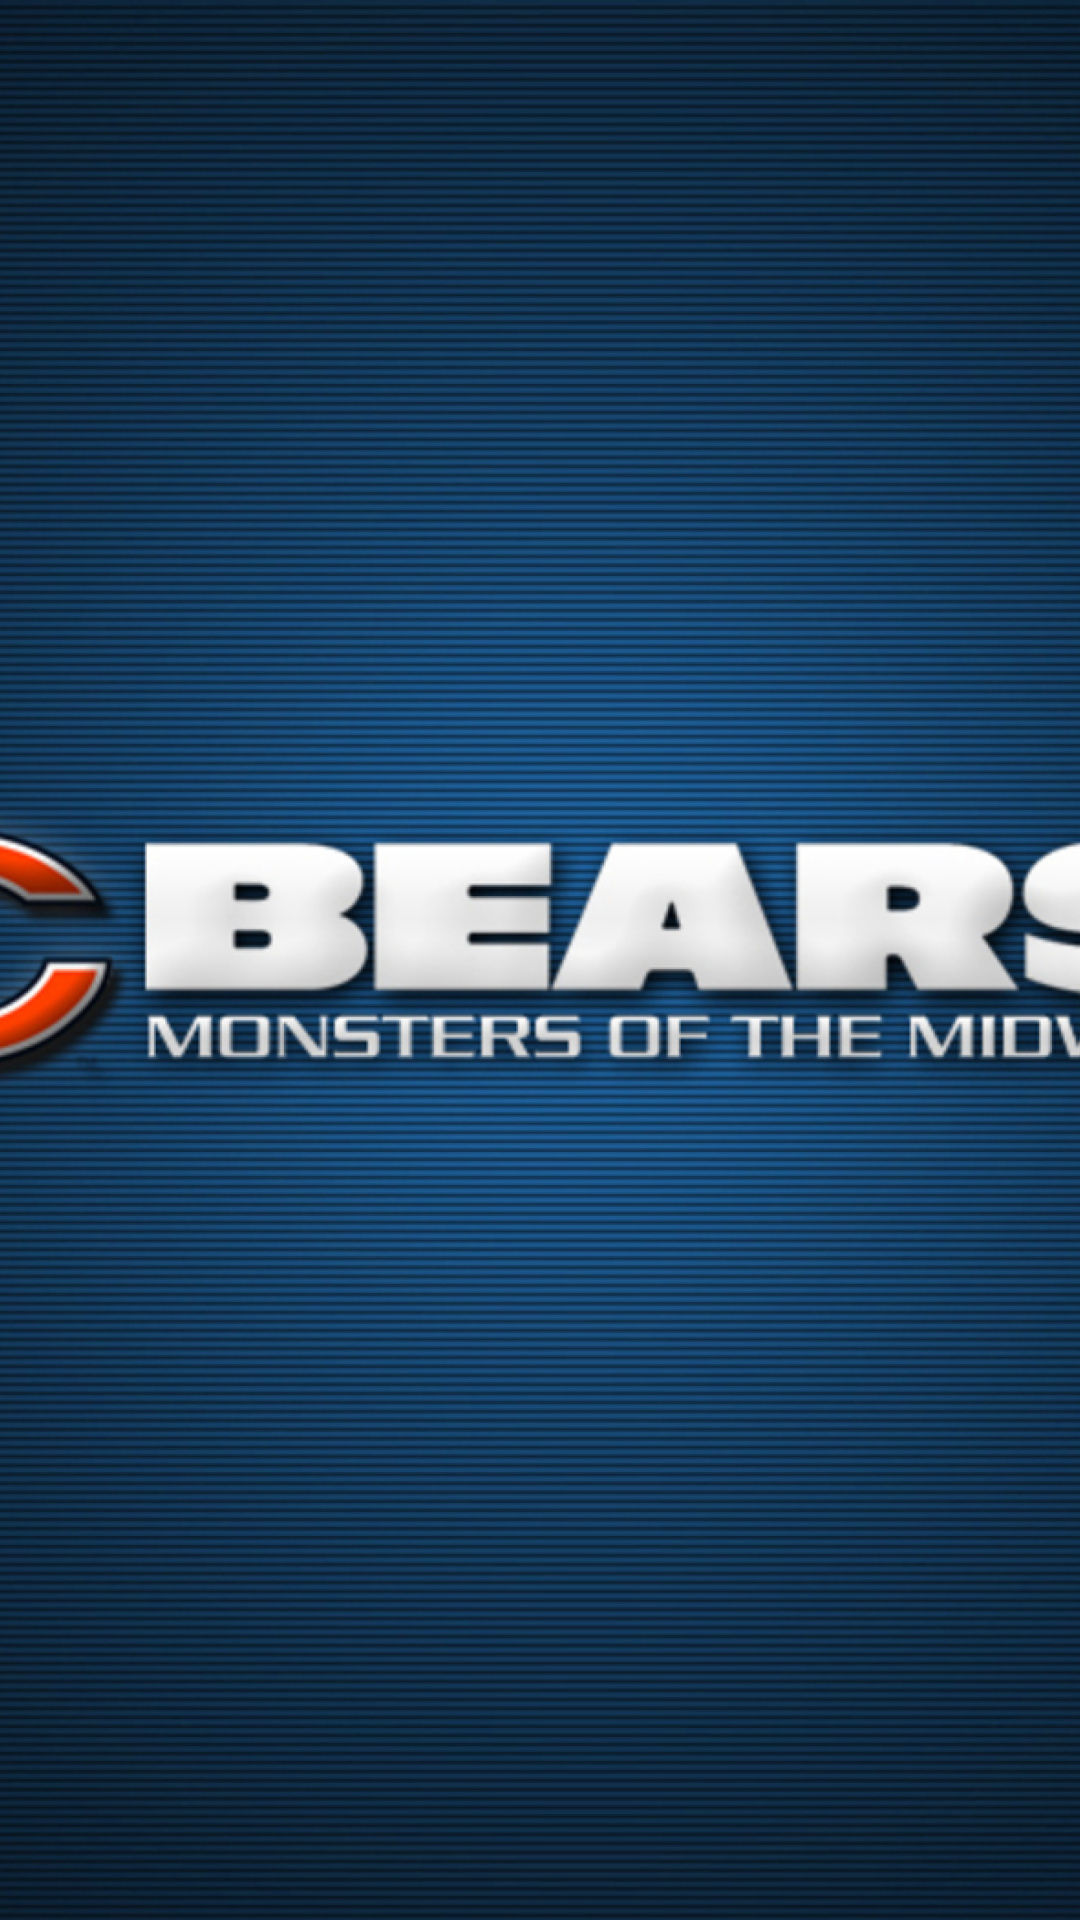 Chicago Bears iPhone Wallpapers